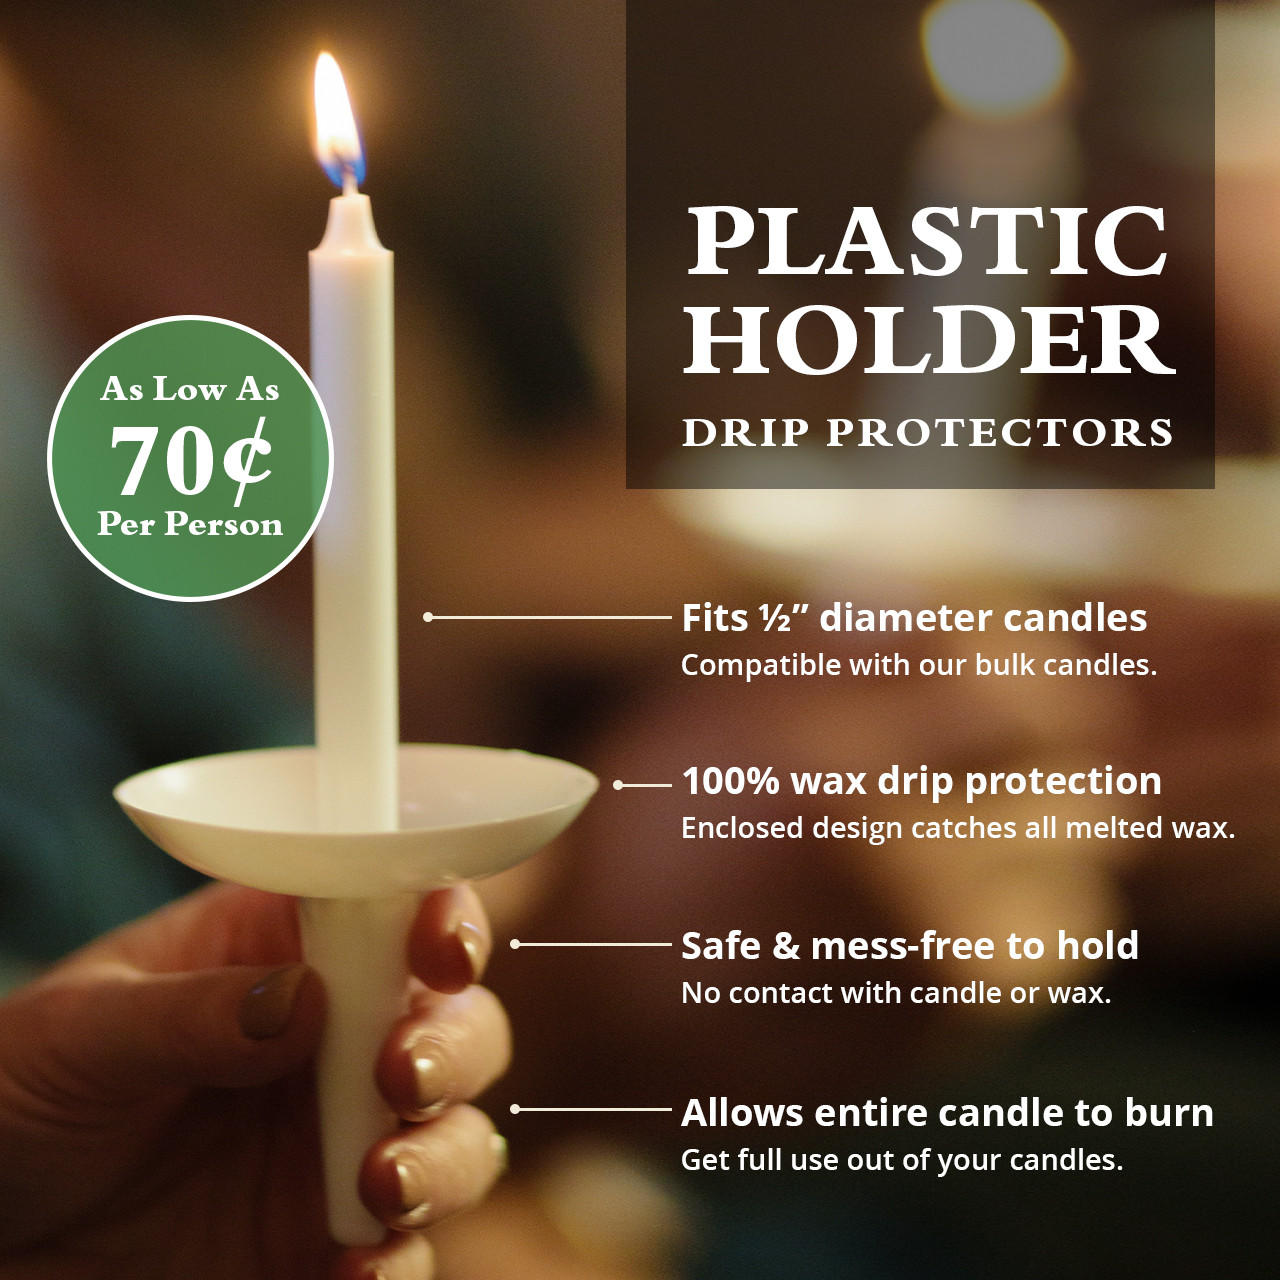 CPSC, Darice Inc. Announce Recall of Candle Holders